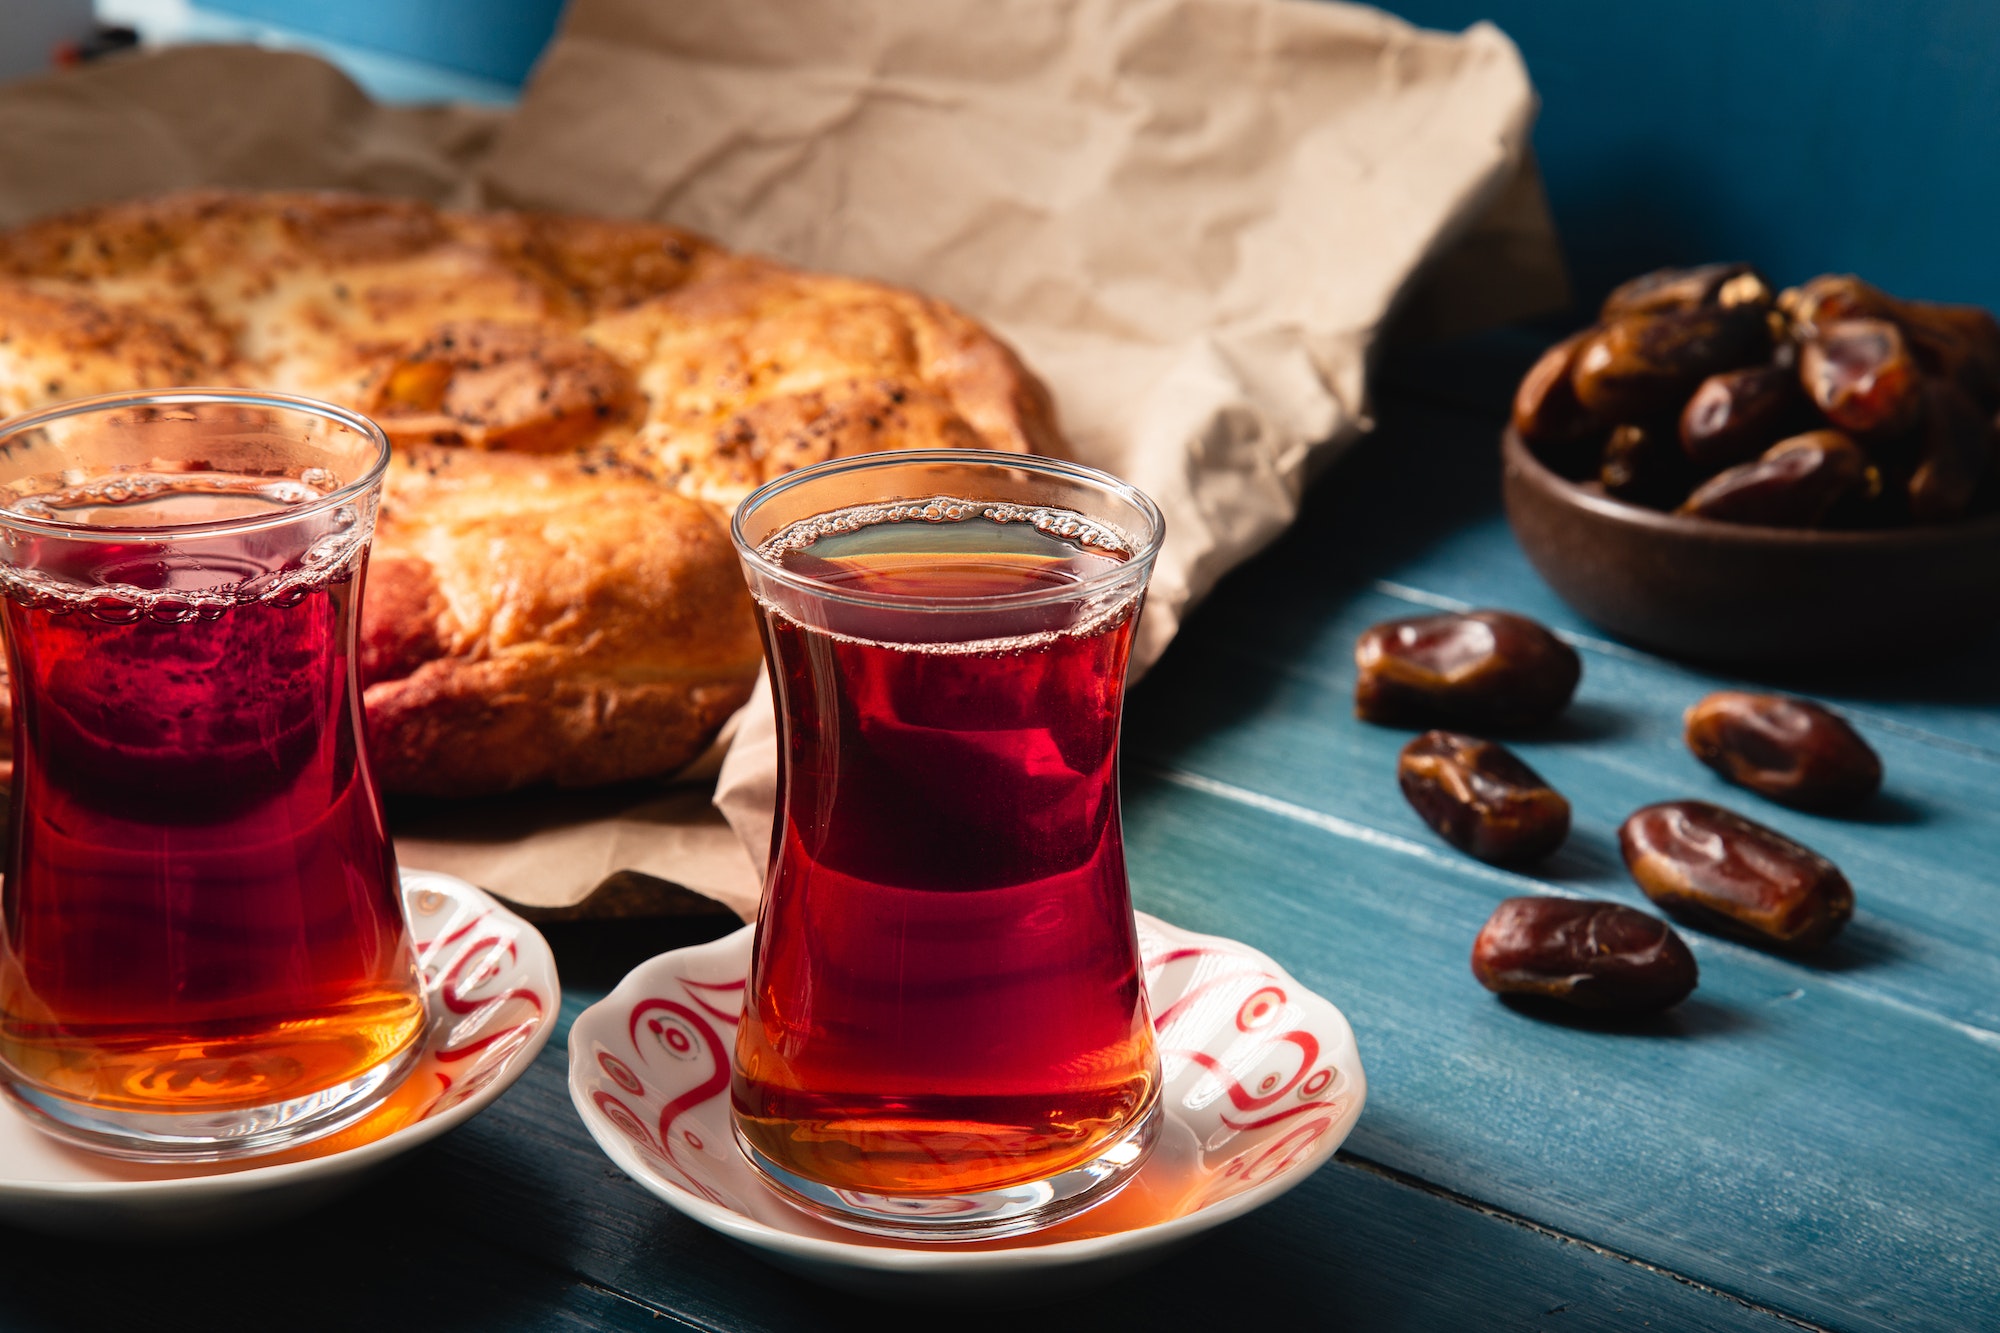 Turkish Ramazan ritual concept with special foods